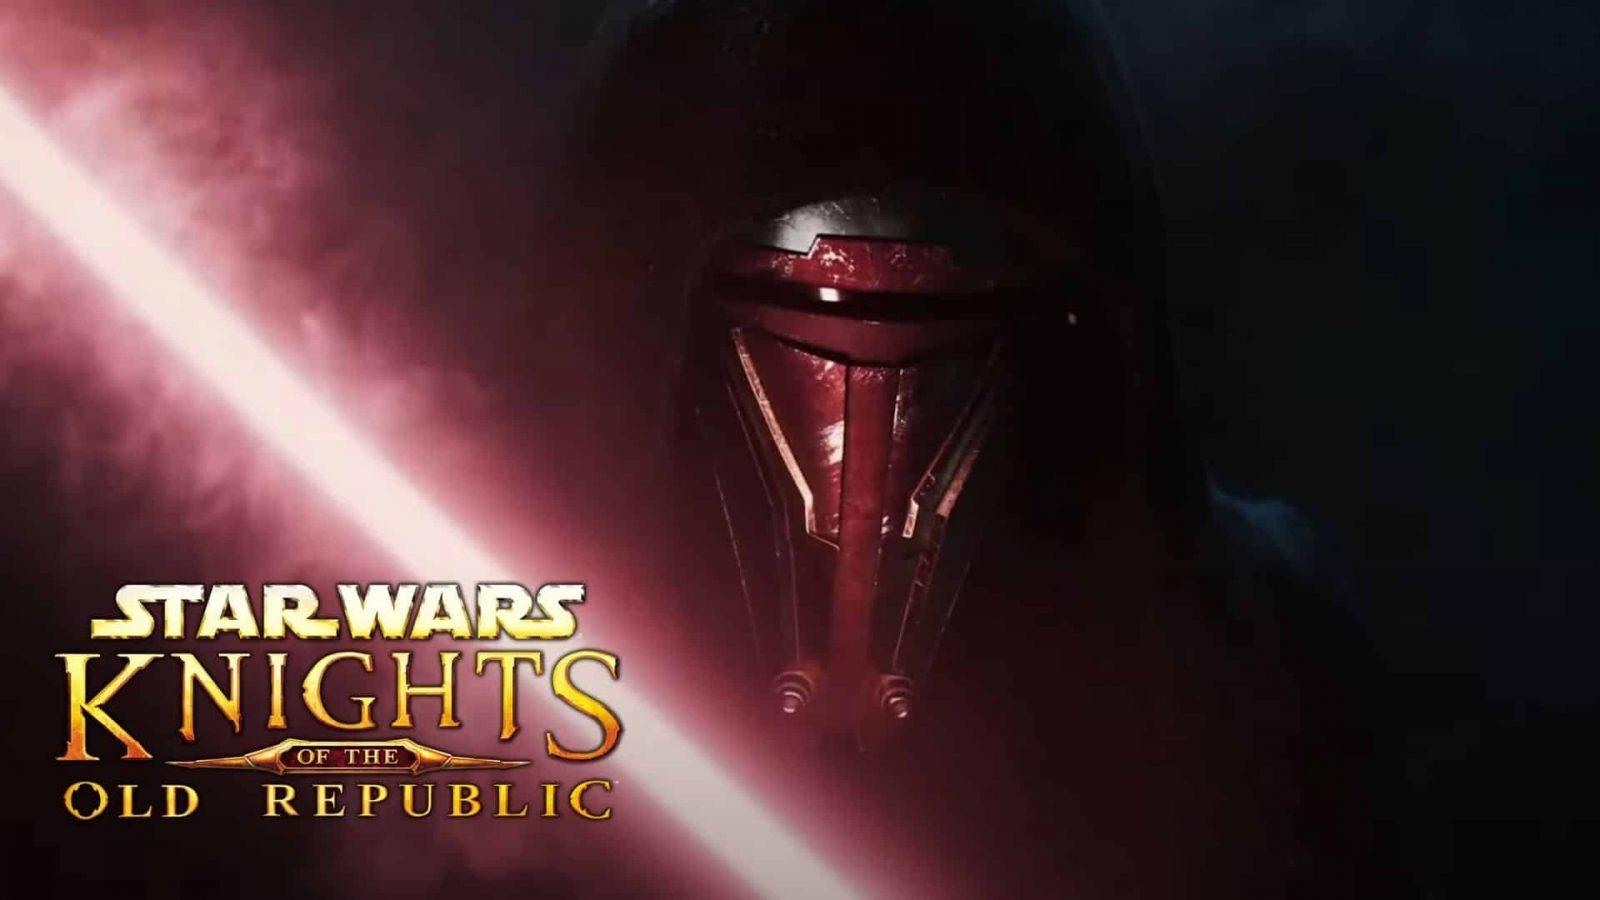 Knights of the Old Republic remake logo with a red lightsaber